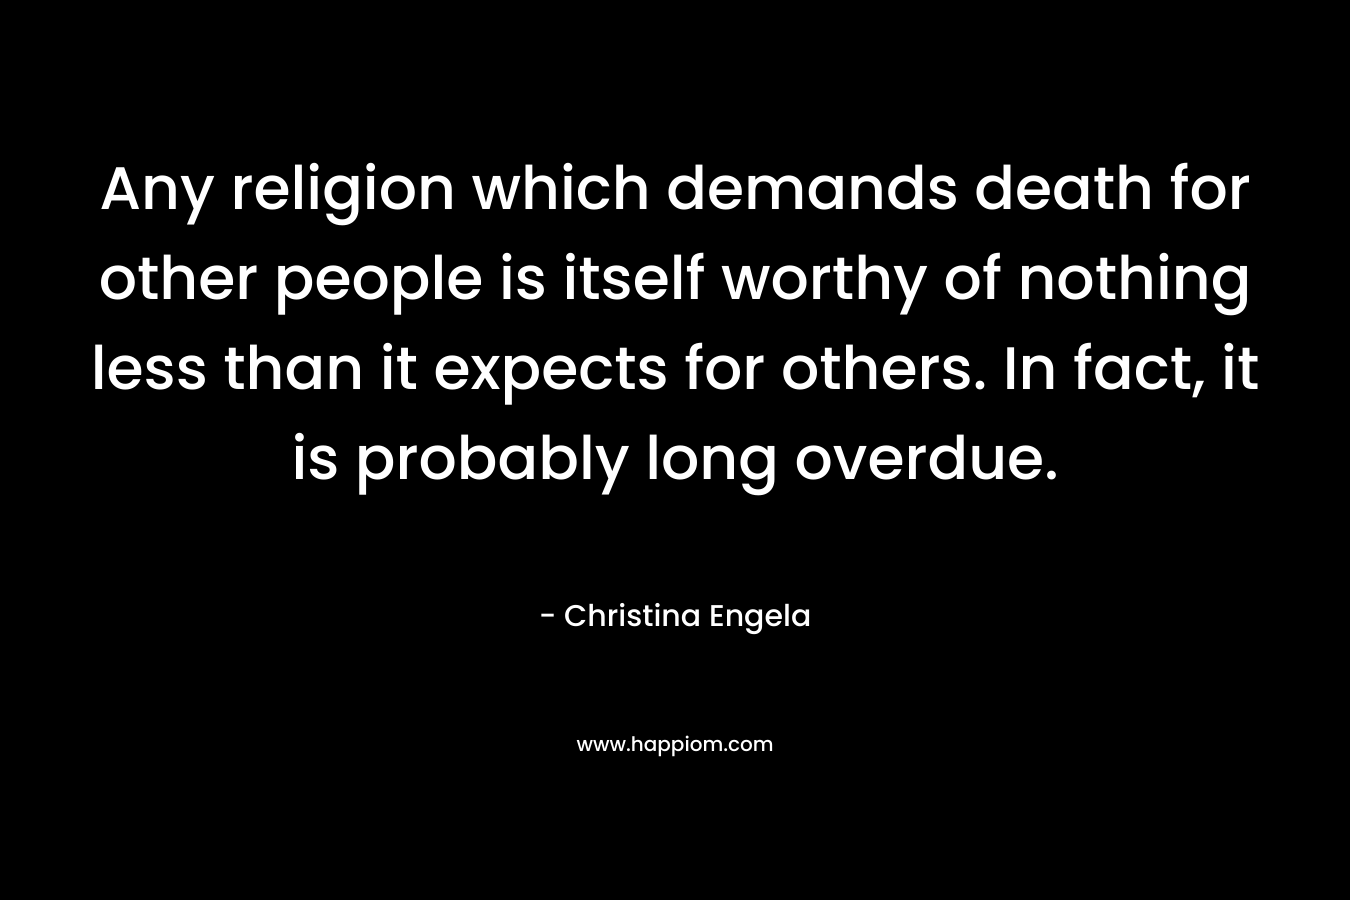 Any religion which demands death for other people is itself worthy of nothing less than it expects for others. In fact, it is probably long overdue.